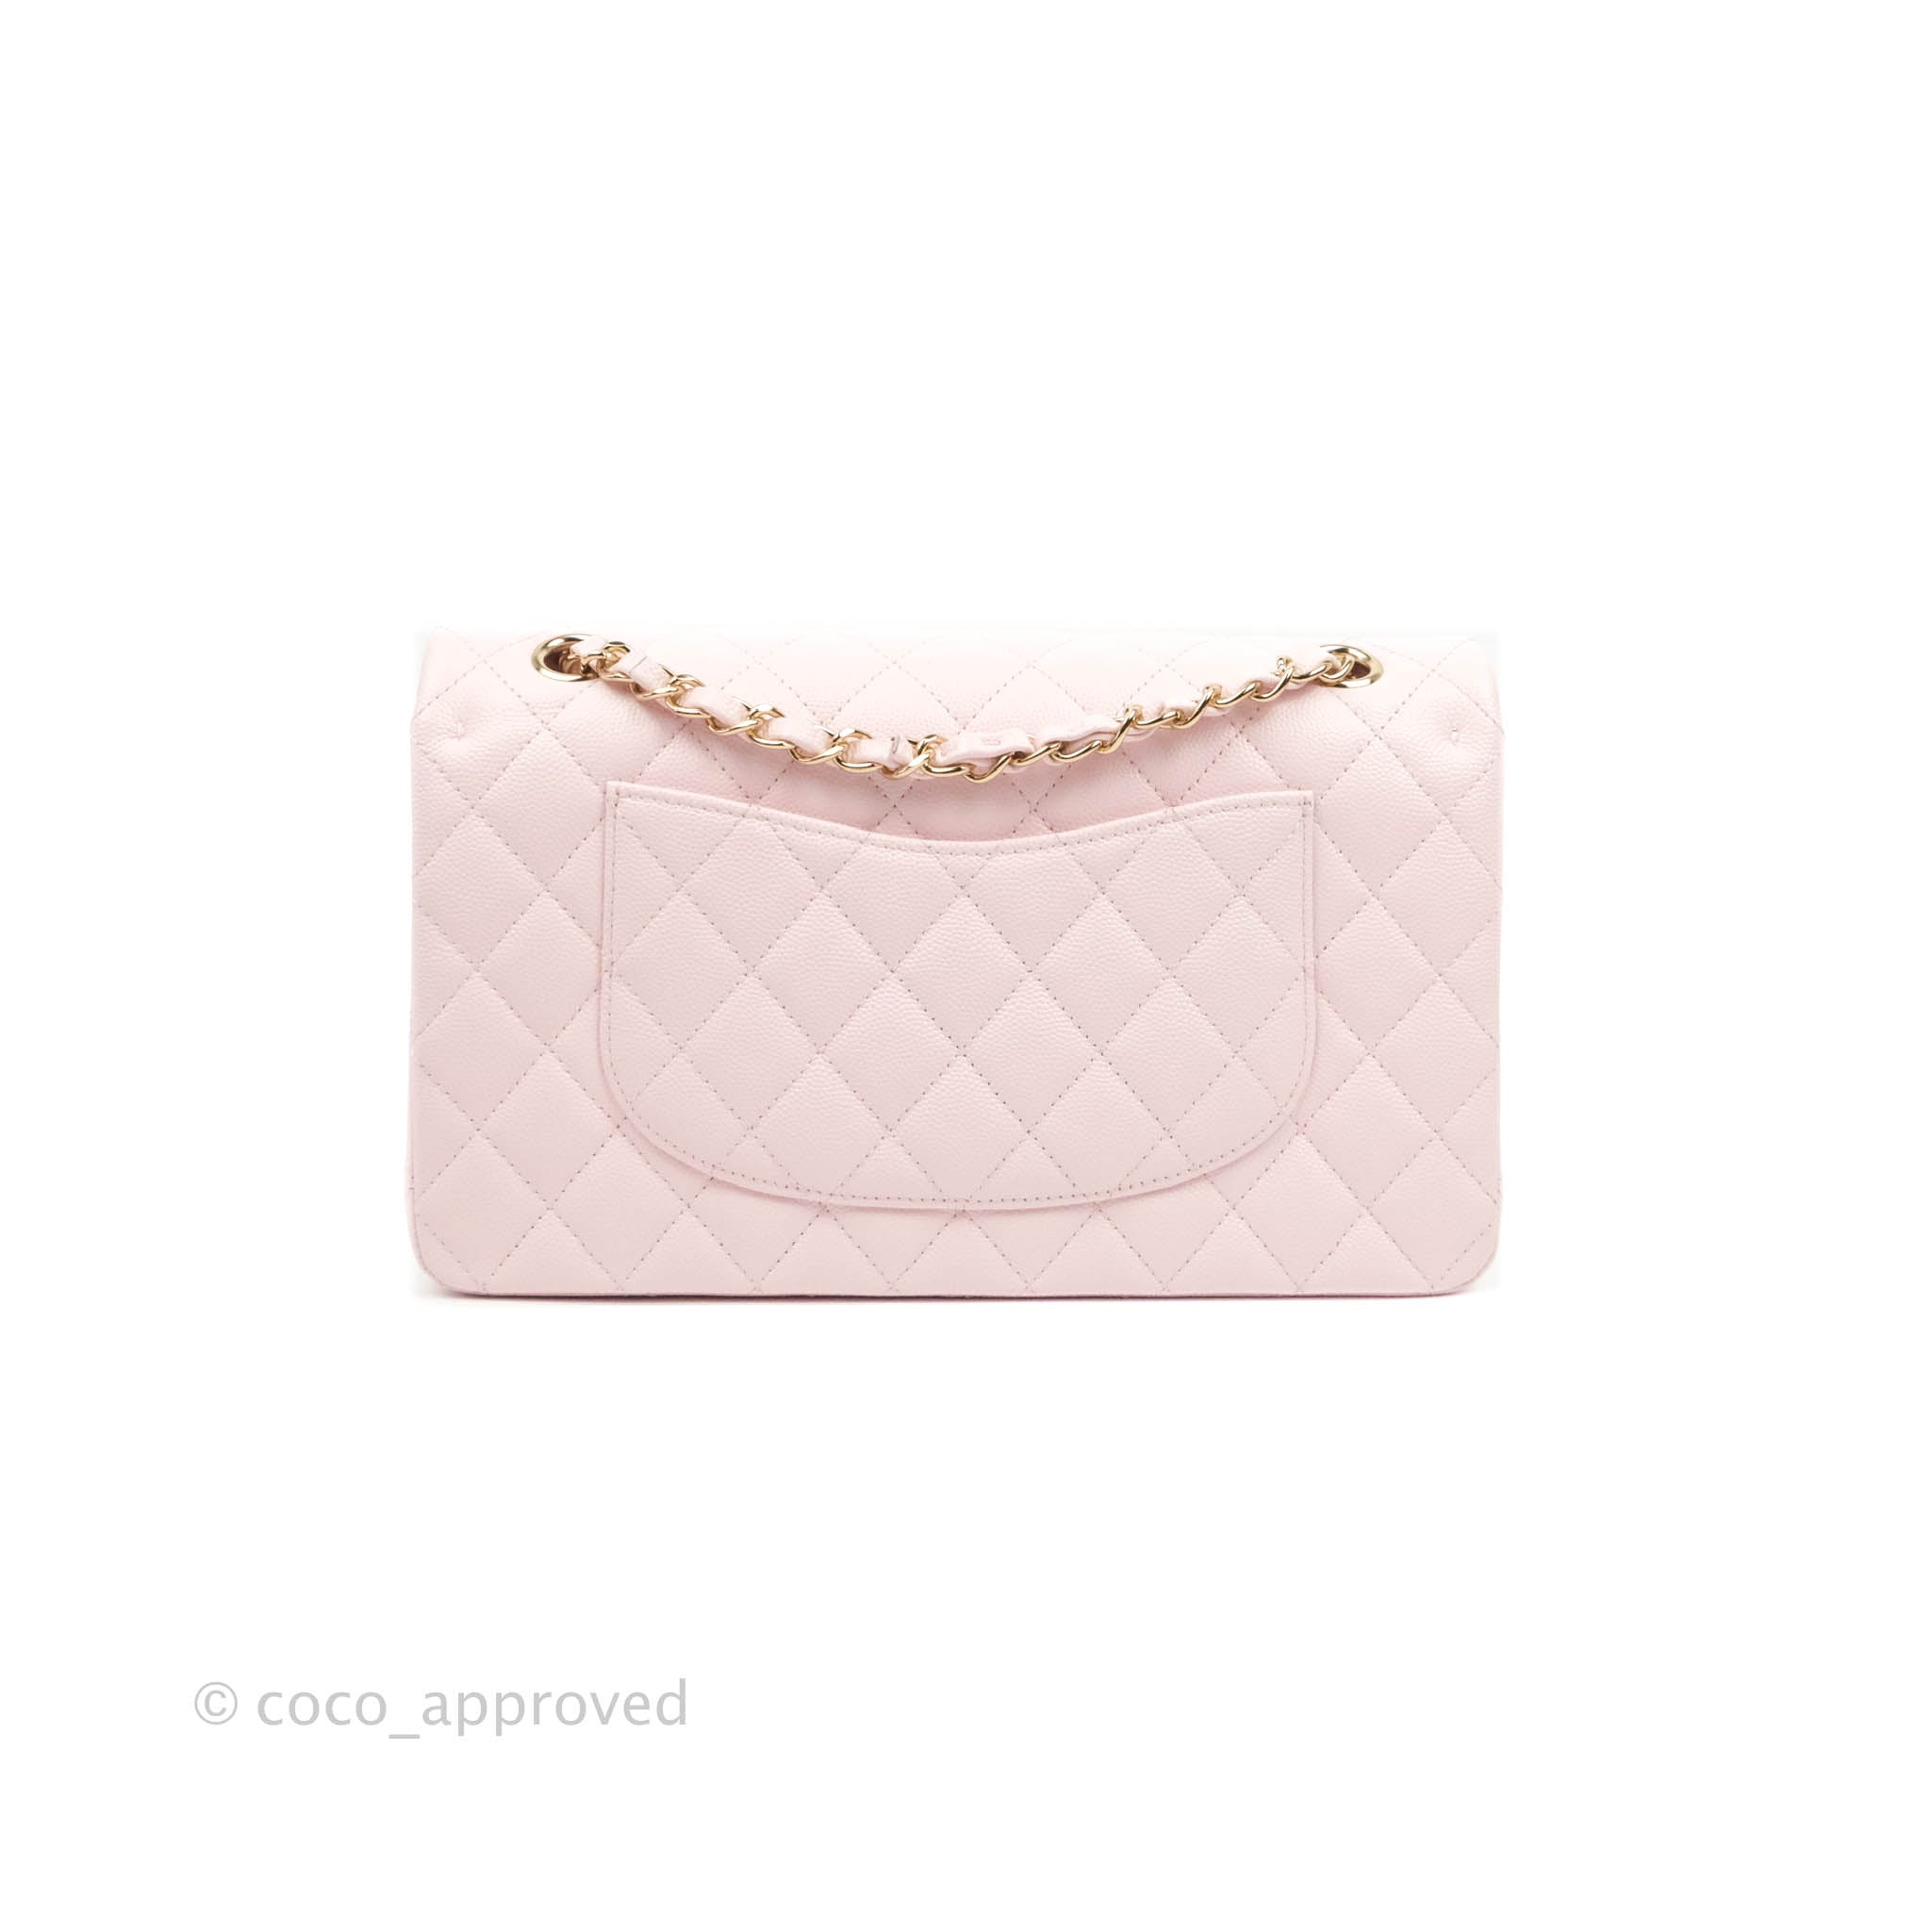 Sold at Auction: Vintage Chanel, Paris, Quilted Dusty Rose Caviar